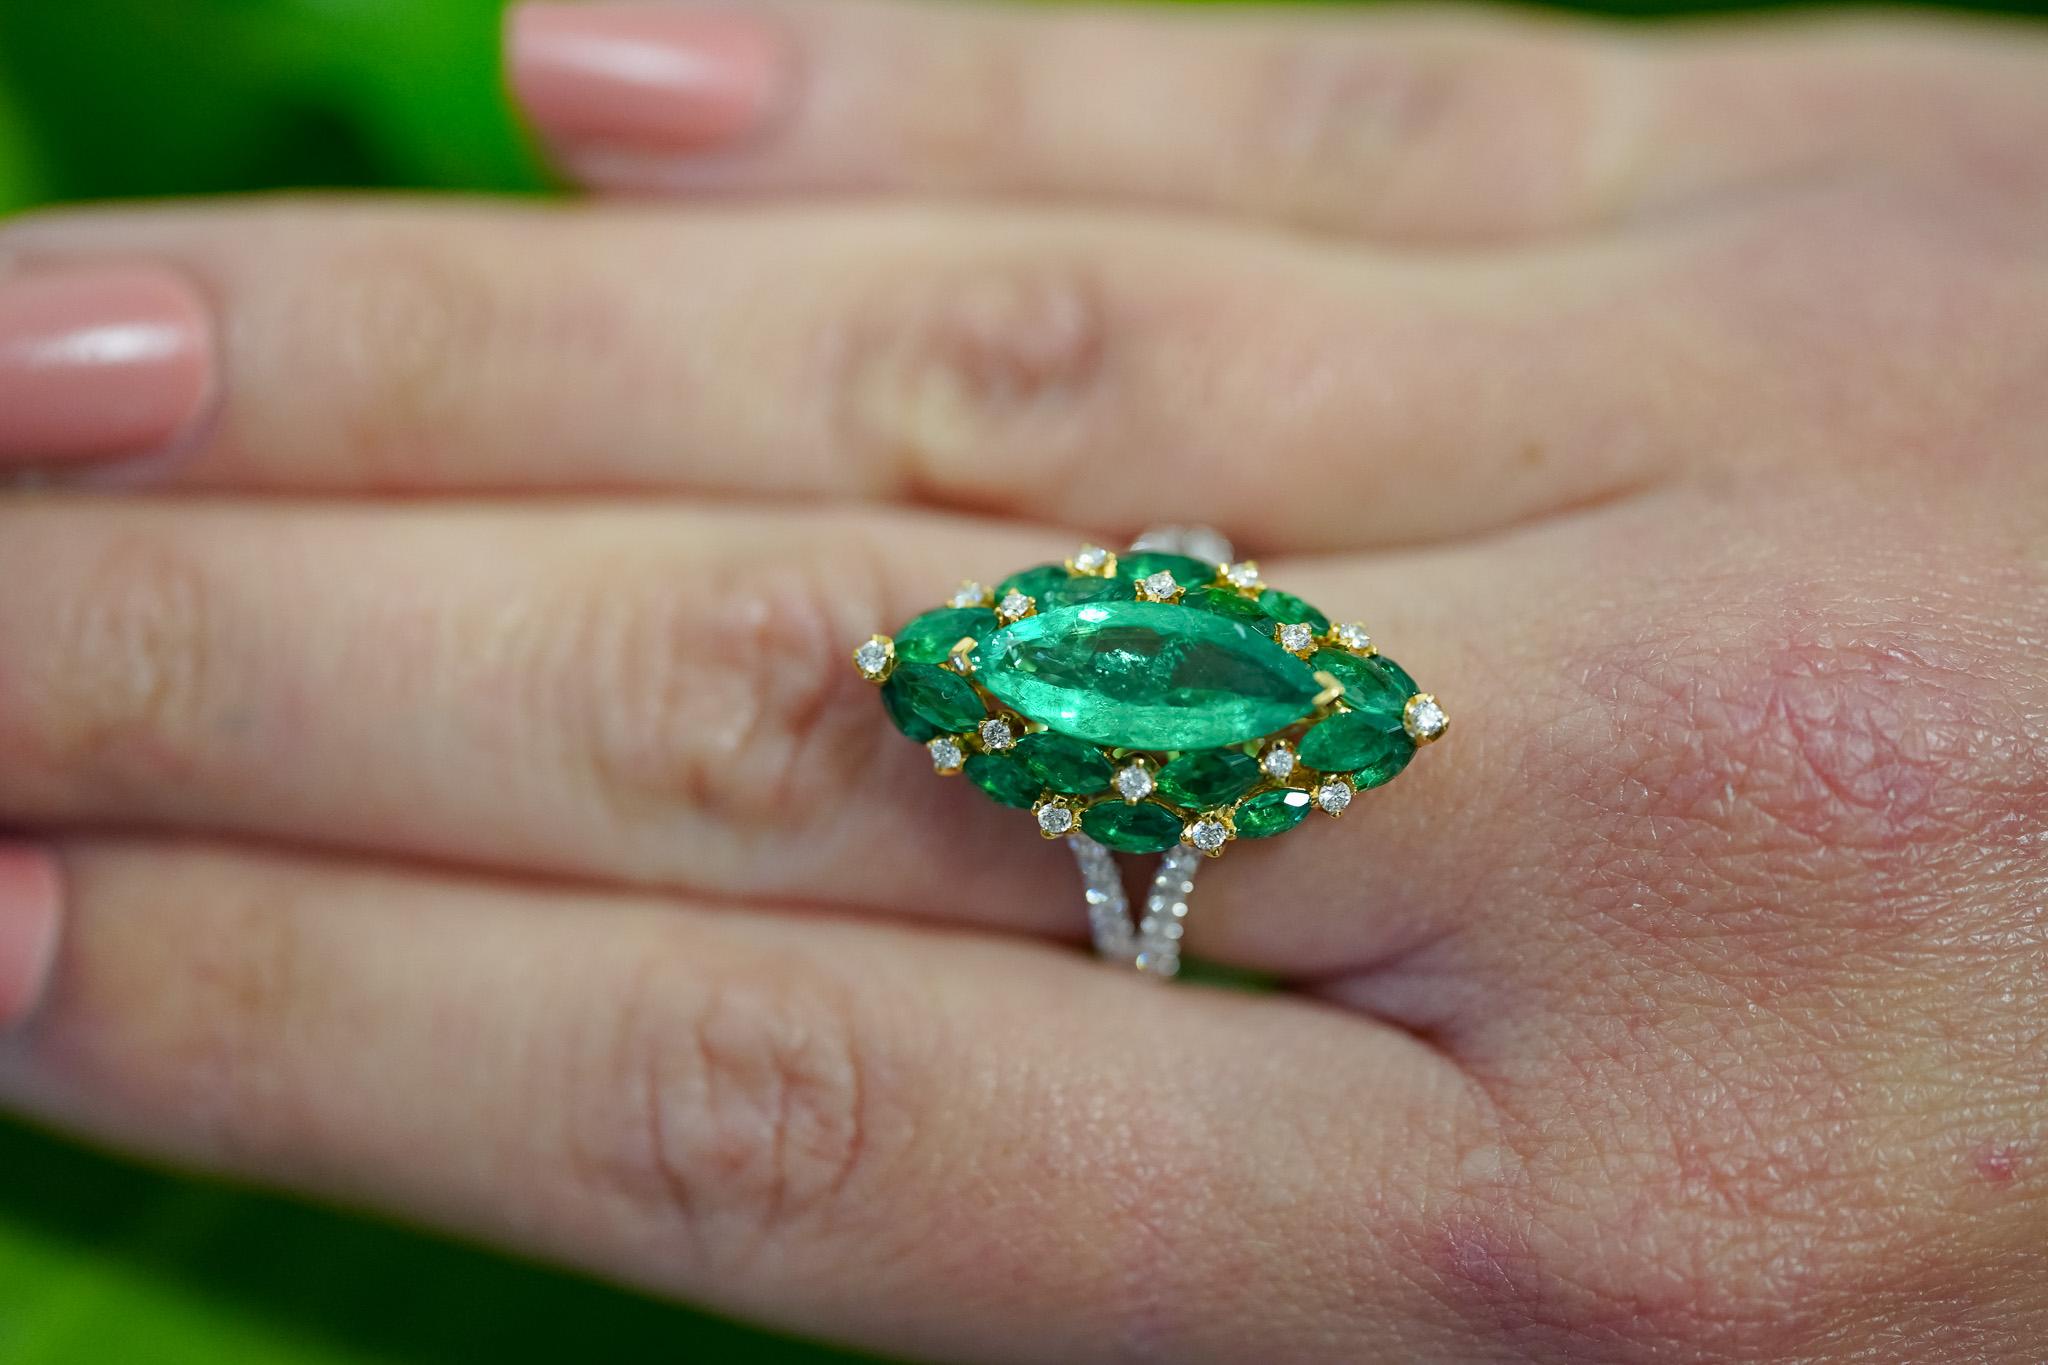 Marquise cut natural emerald and diamond ring in 18k gold. Featuring a vivid green 1.96 carat Colombian emerald center stone. Flanked by a gorgeous cluster of marquise Colombian emeralds and round diamonds. Each Emerald is mounted with sharp 18k